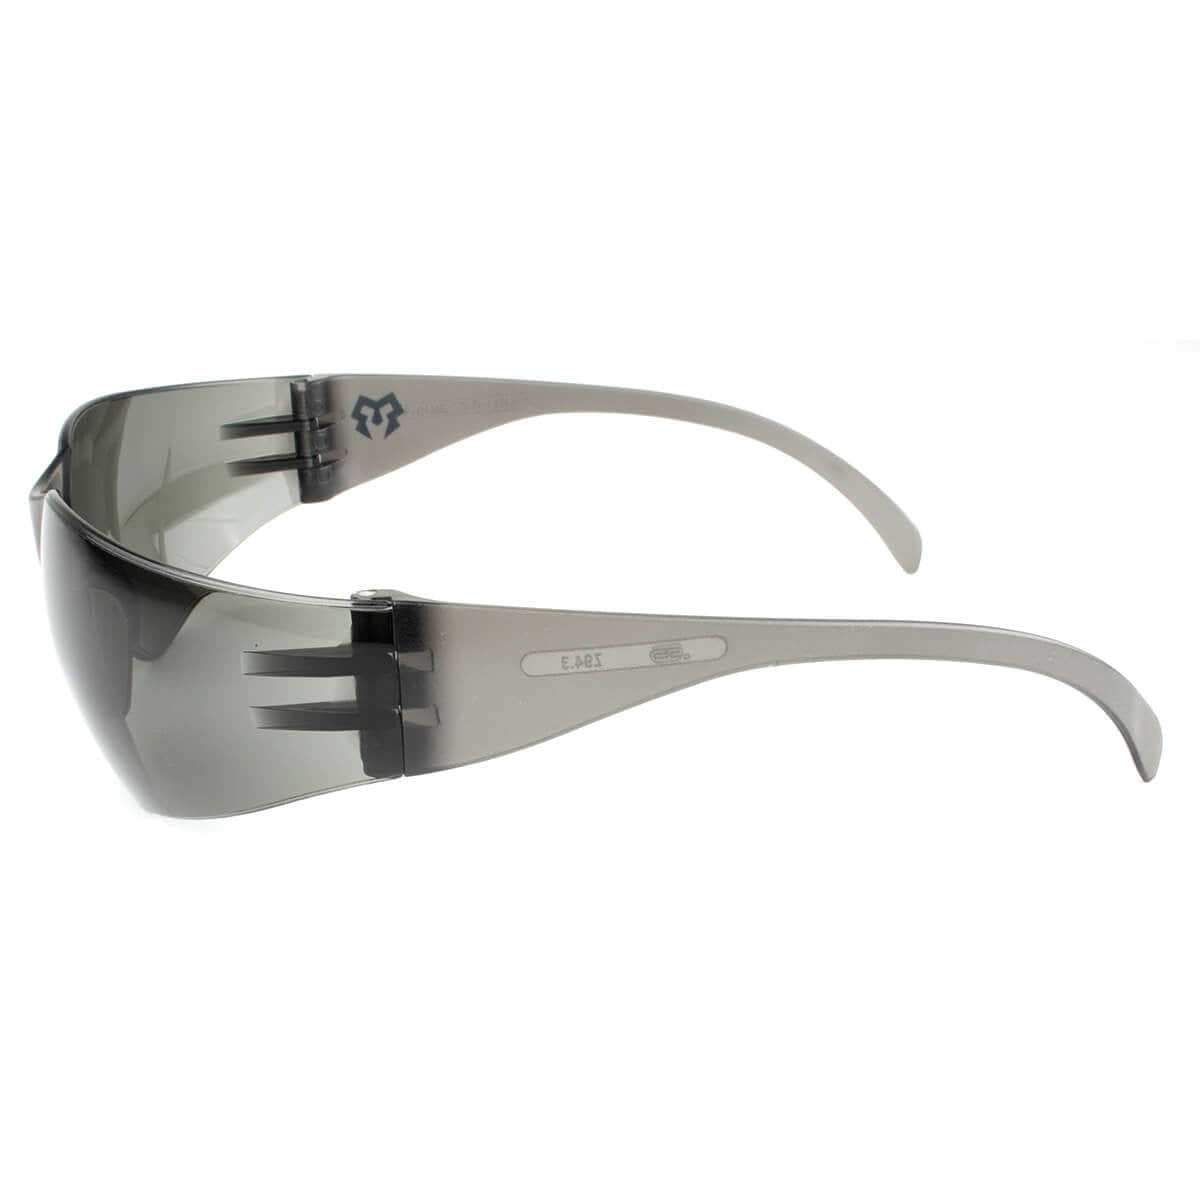 METEL M10 Safety Glasses with Gray Lenses Side View